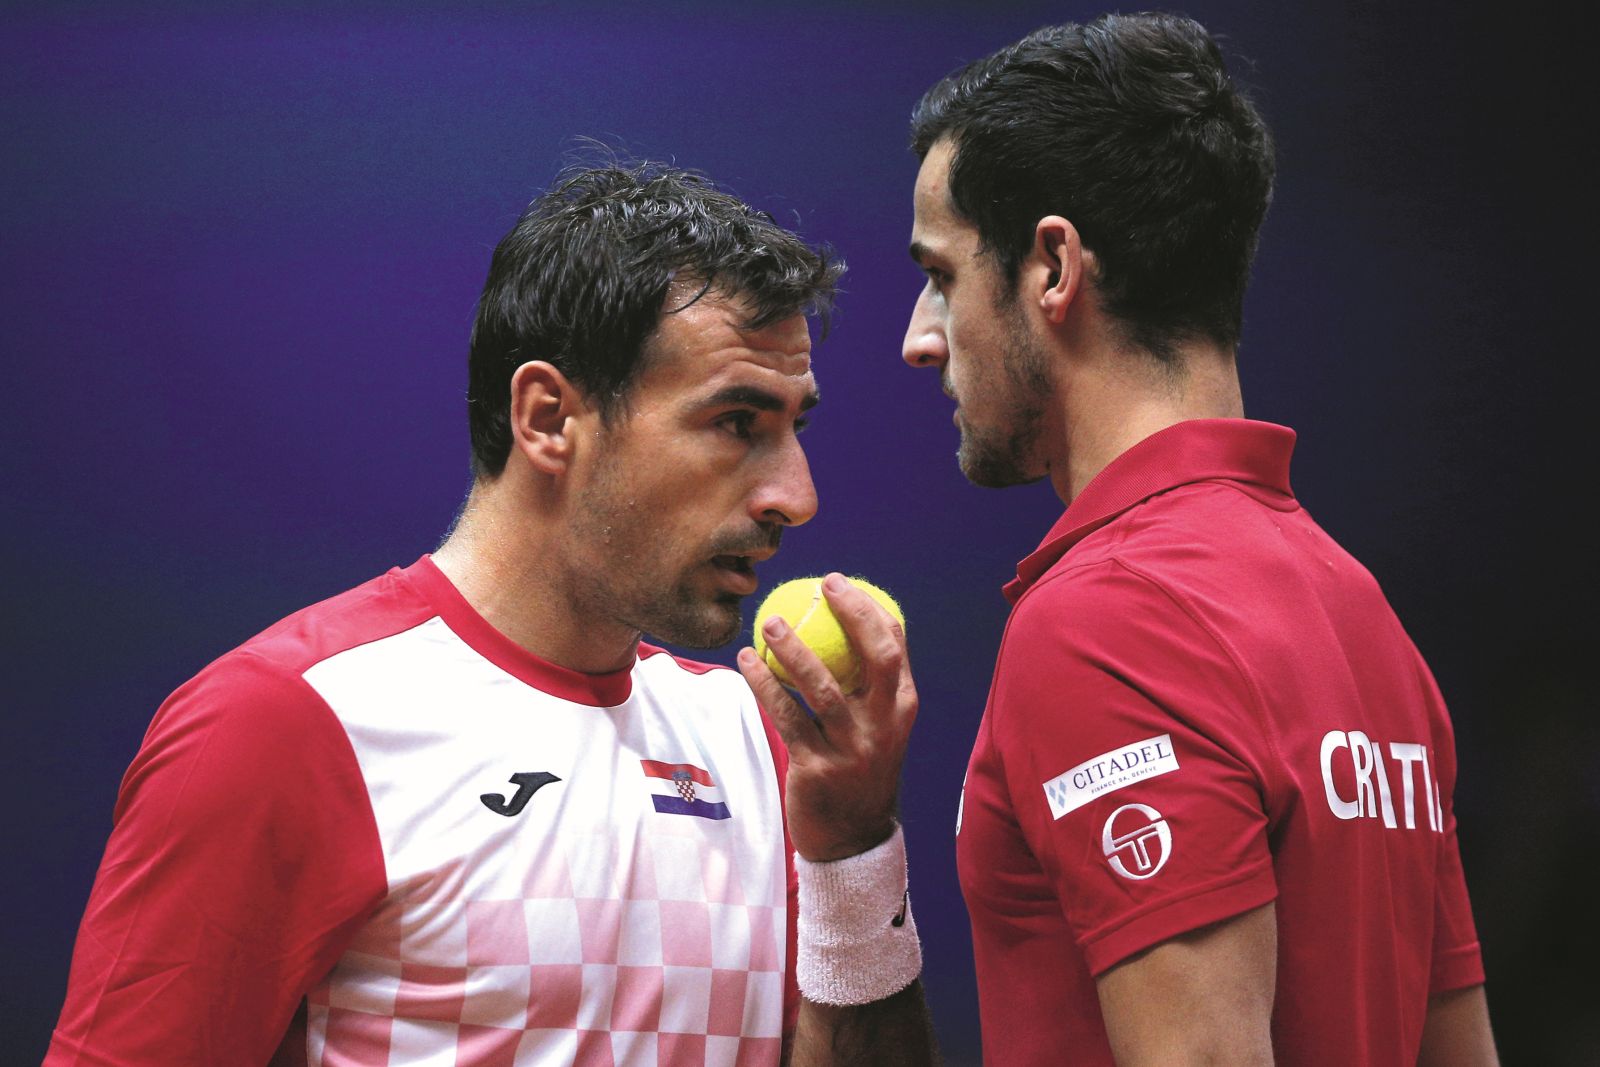 Croatia's Ivan Dodig, left, and Mate Pavic talk during the Davis Cup final between France and Croatia, Saturday, Nov. 24, 2018 in Lille, northern France. Croatia is within one point of a second Davis Cup title after Borna Coric and Marin Cilic dispatched their French rivals in the opening singles matches of the final to take a 2-0 lead. (AP Photo/Thibault Camus)